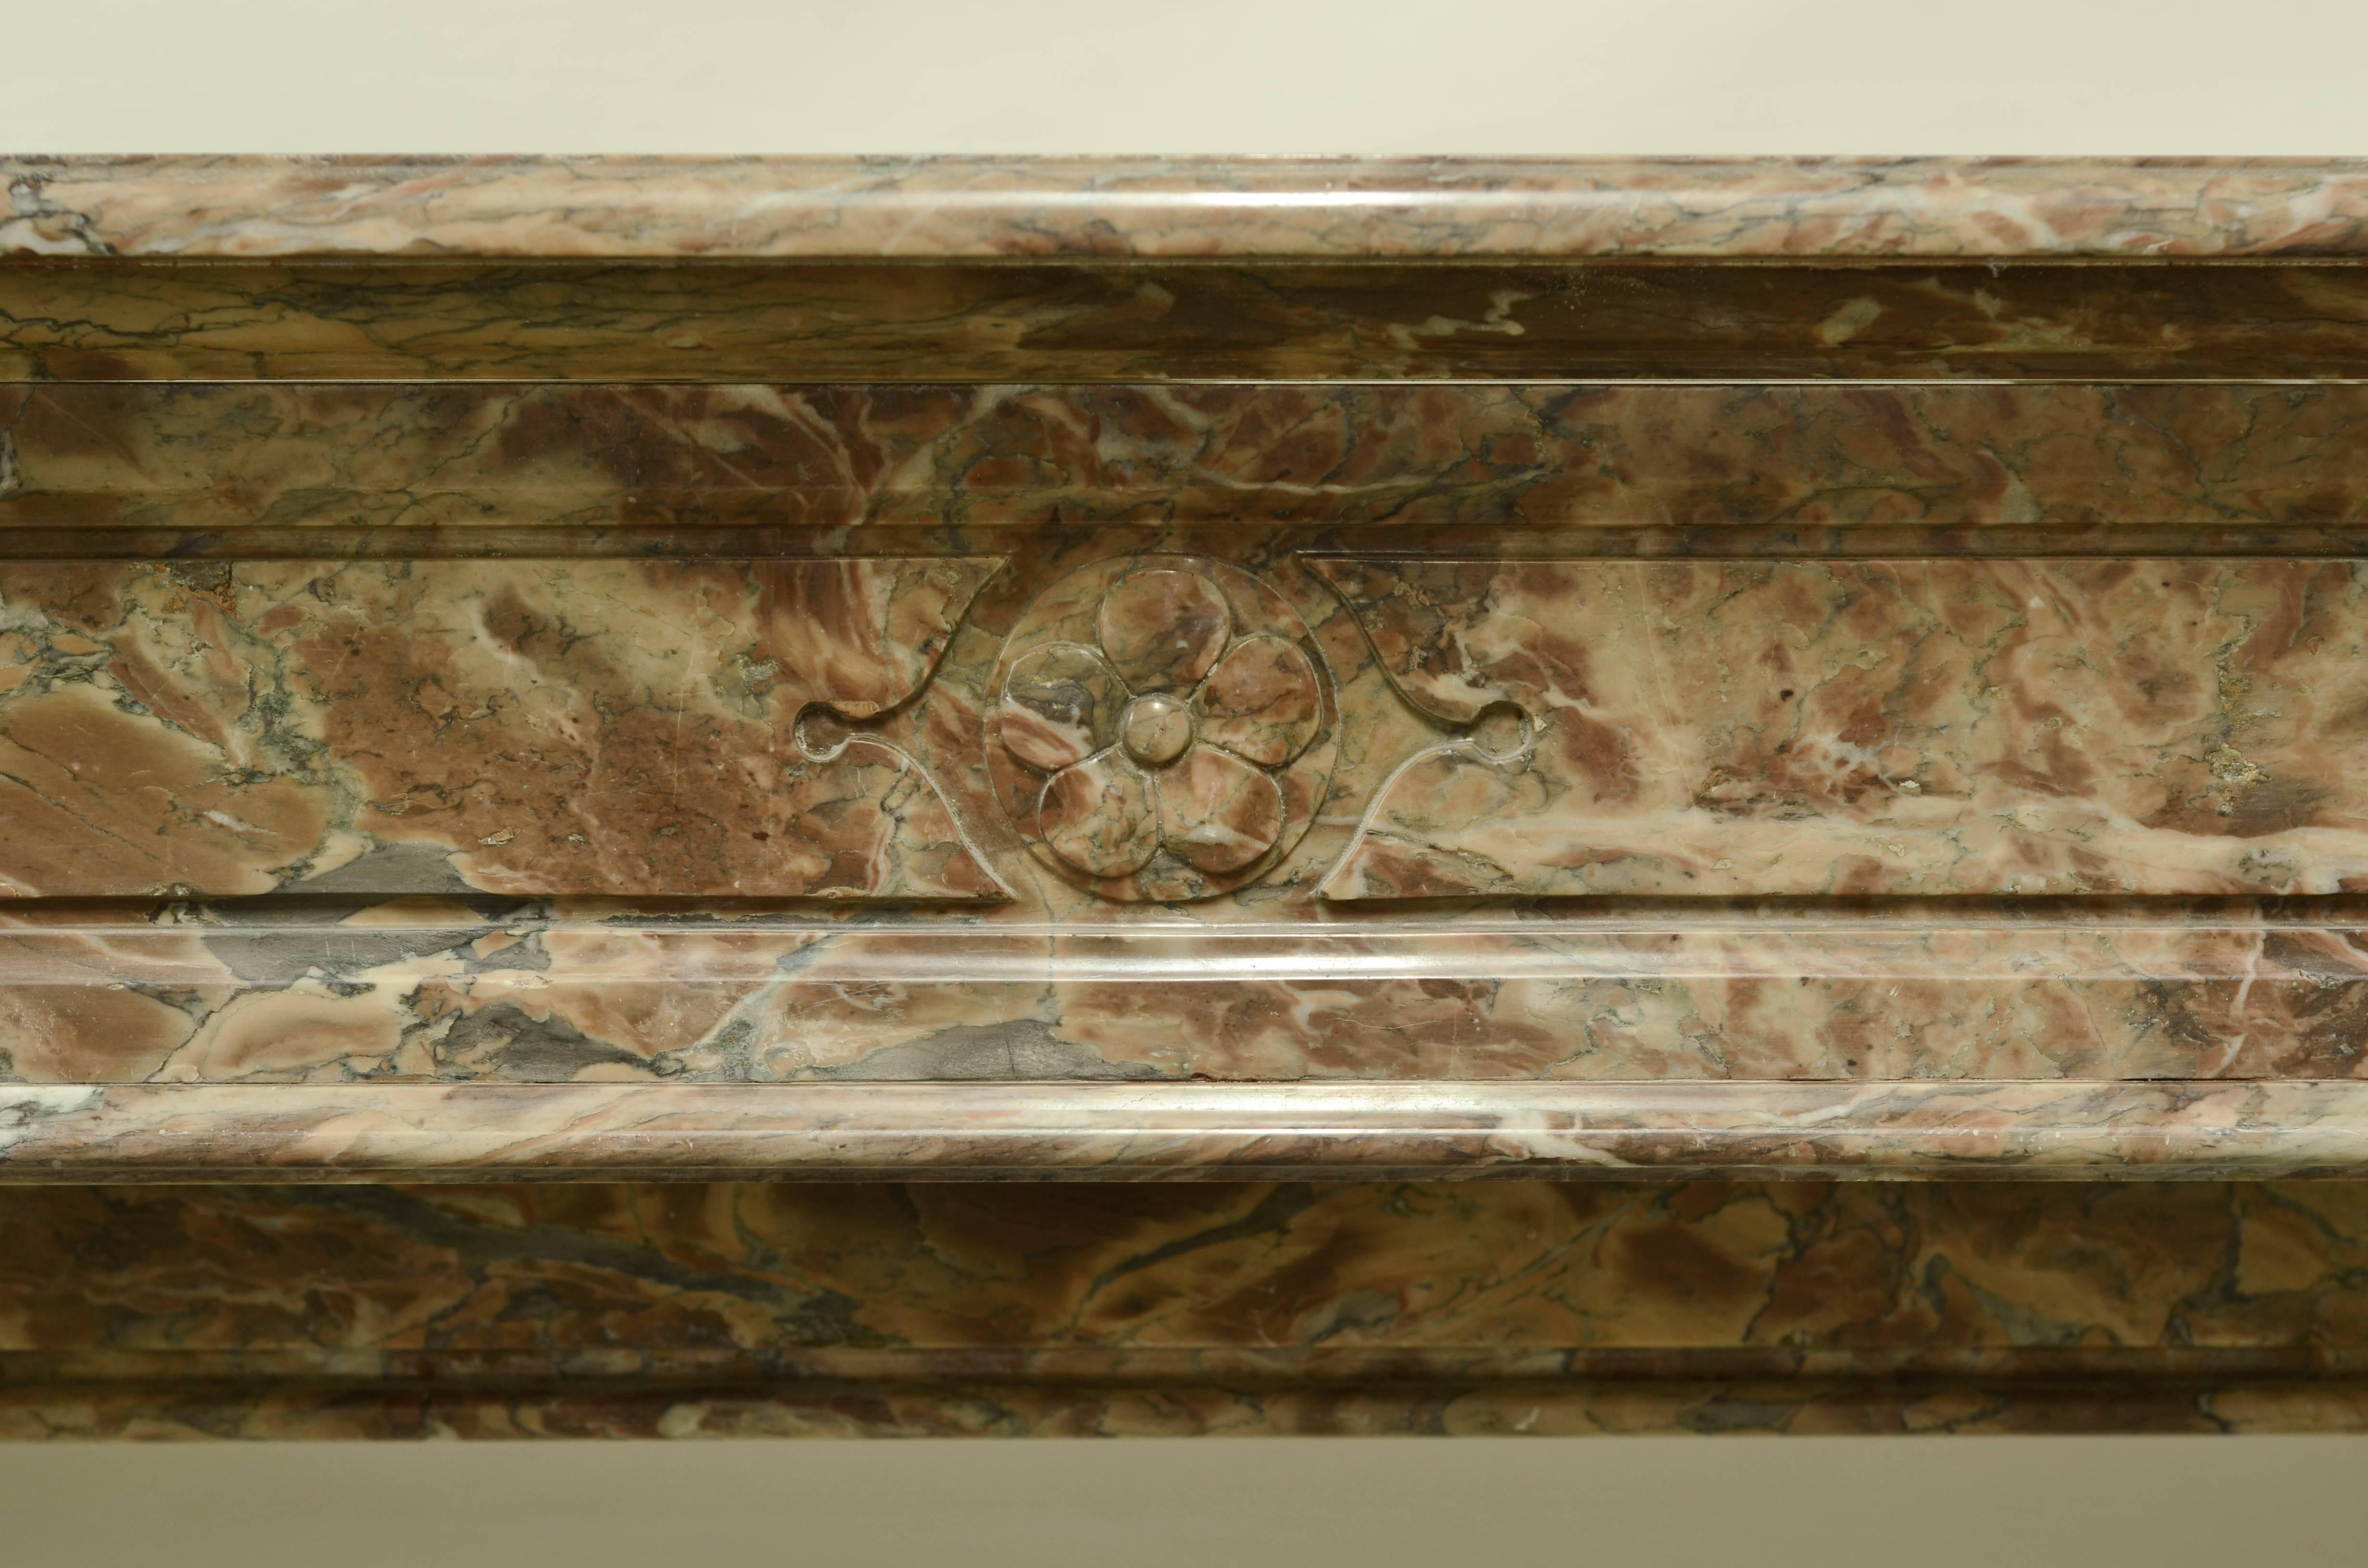 19th century French marble Louis XVI fireplace mantel with pillars.

Opening measurements: 34.8 x 38.9 inch or 88.5 x 99 cm. (height x width).

Excellent condition, ready to be shipped and installed.